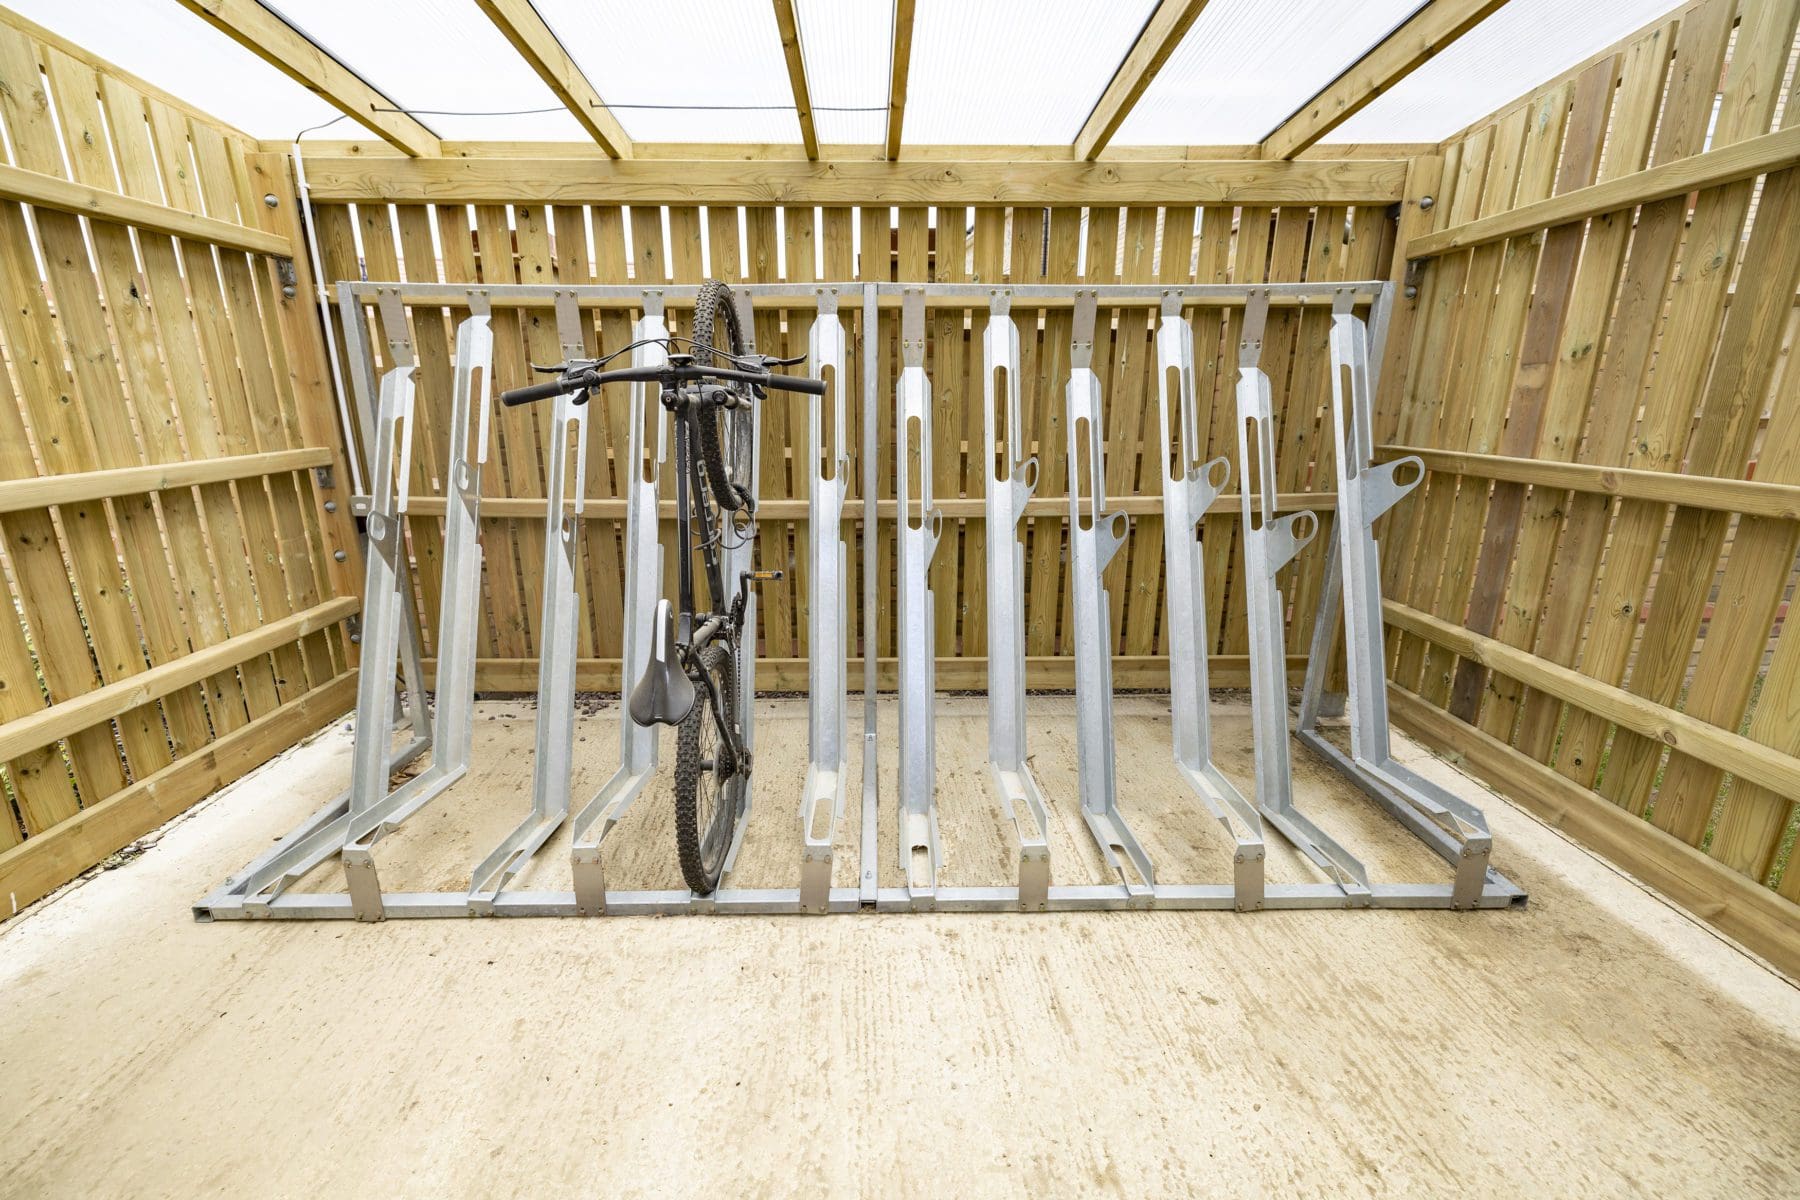 wooden-cycle-shelter-inside-rack